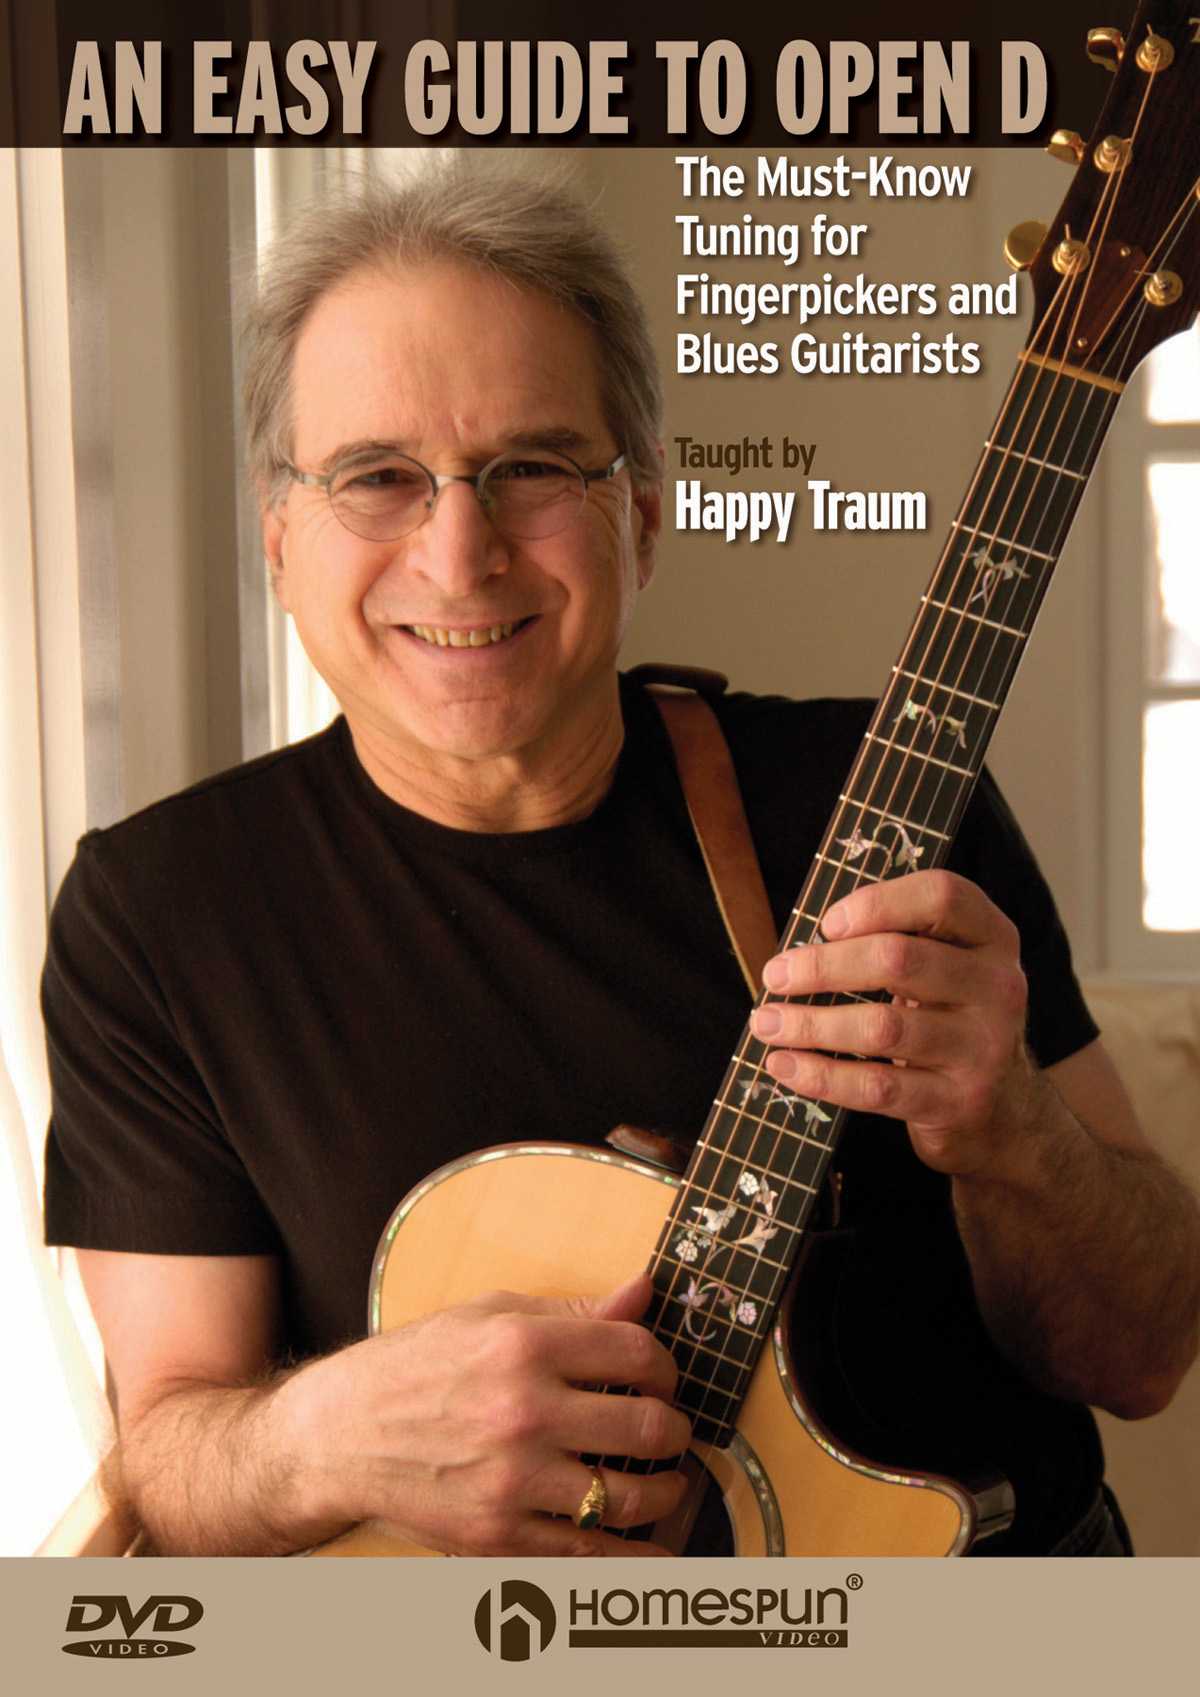 Image 1 of DVD-An Easy Guide to Open D-The Must-Know Tuning for Fingerpickers and Blues Guitarists - SKU# 300-DVD411 : Product Type Media : Elderly Instruments